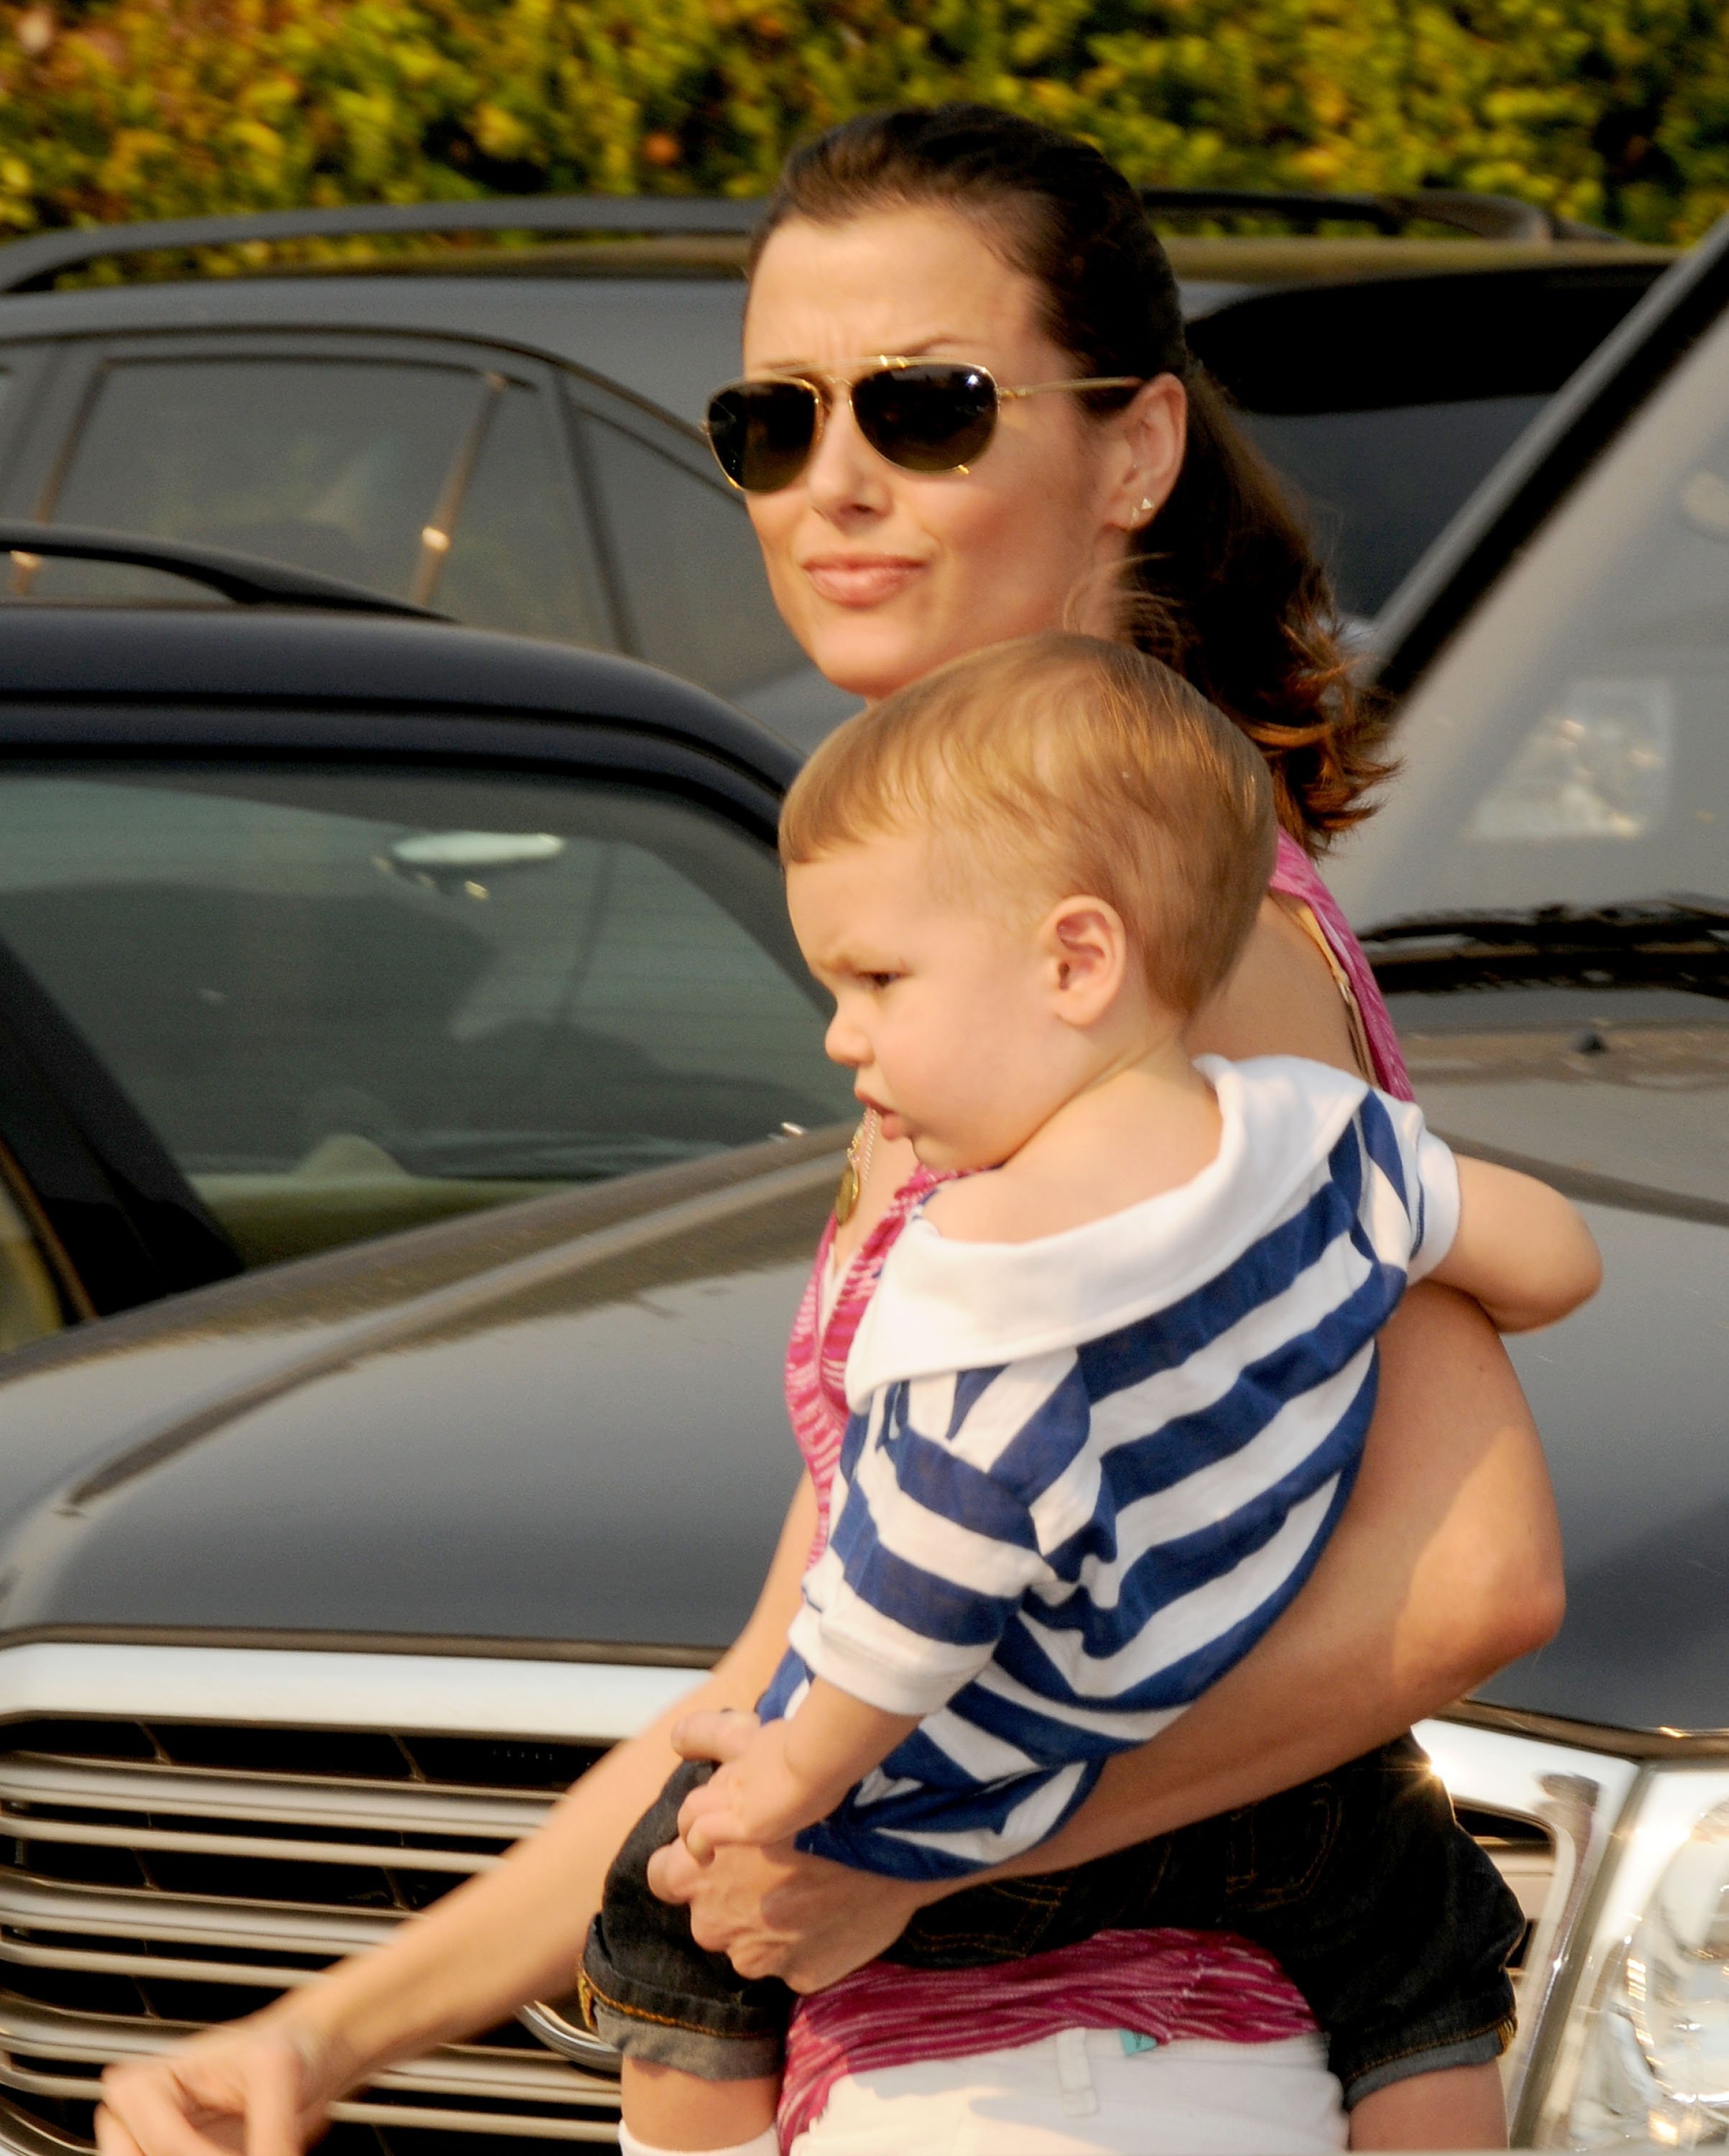 Bridget Moynahan and Son arrive at the 11th Anniversary Of P.S. Arts "Express Yourself 2008" at the Barker Hanger at the Santa Monica Airport on November 16, 2008 in Santa Monica, California | Source: Getty Images 